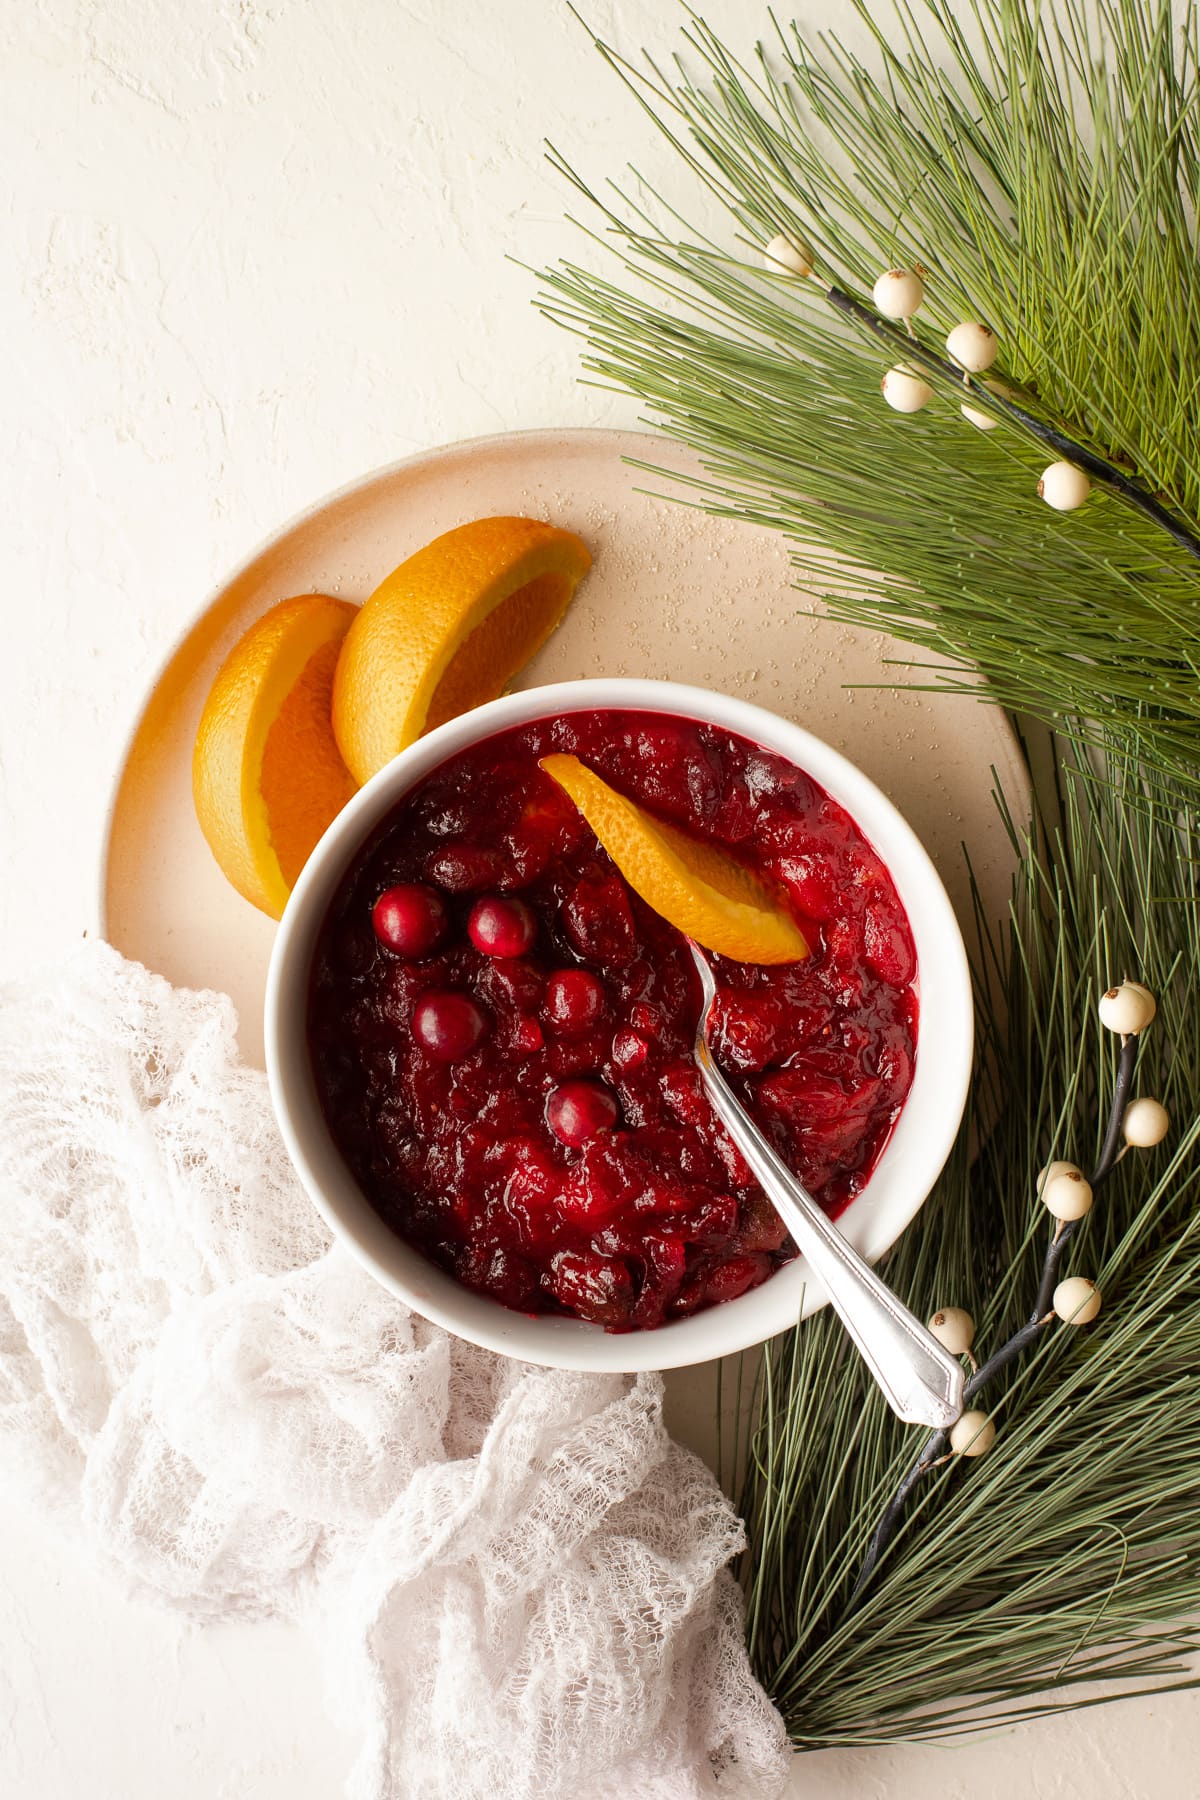 Bowl of homemade cranberry sauce garnished with an orange peel.